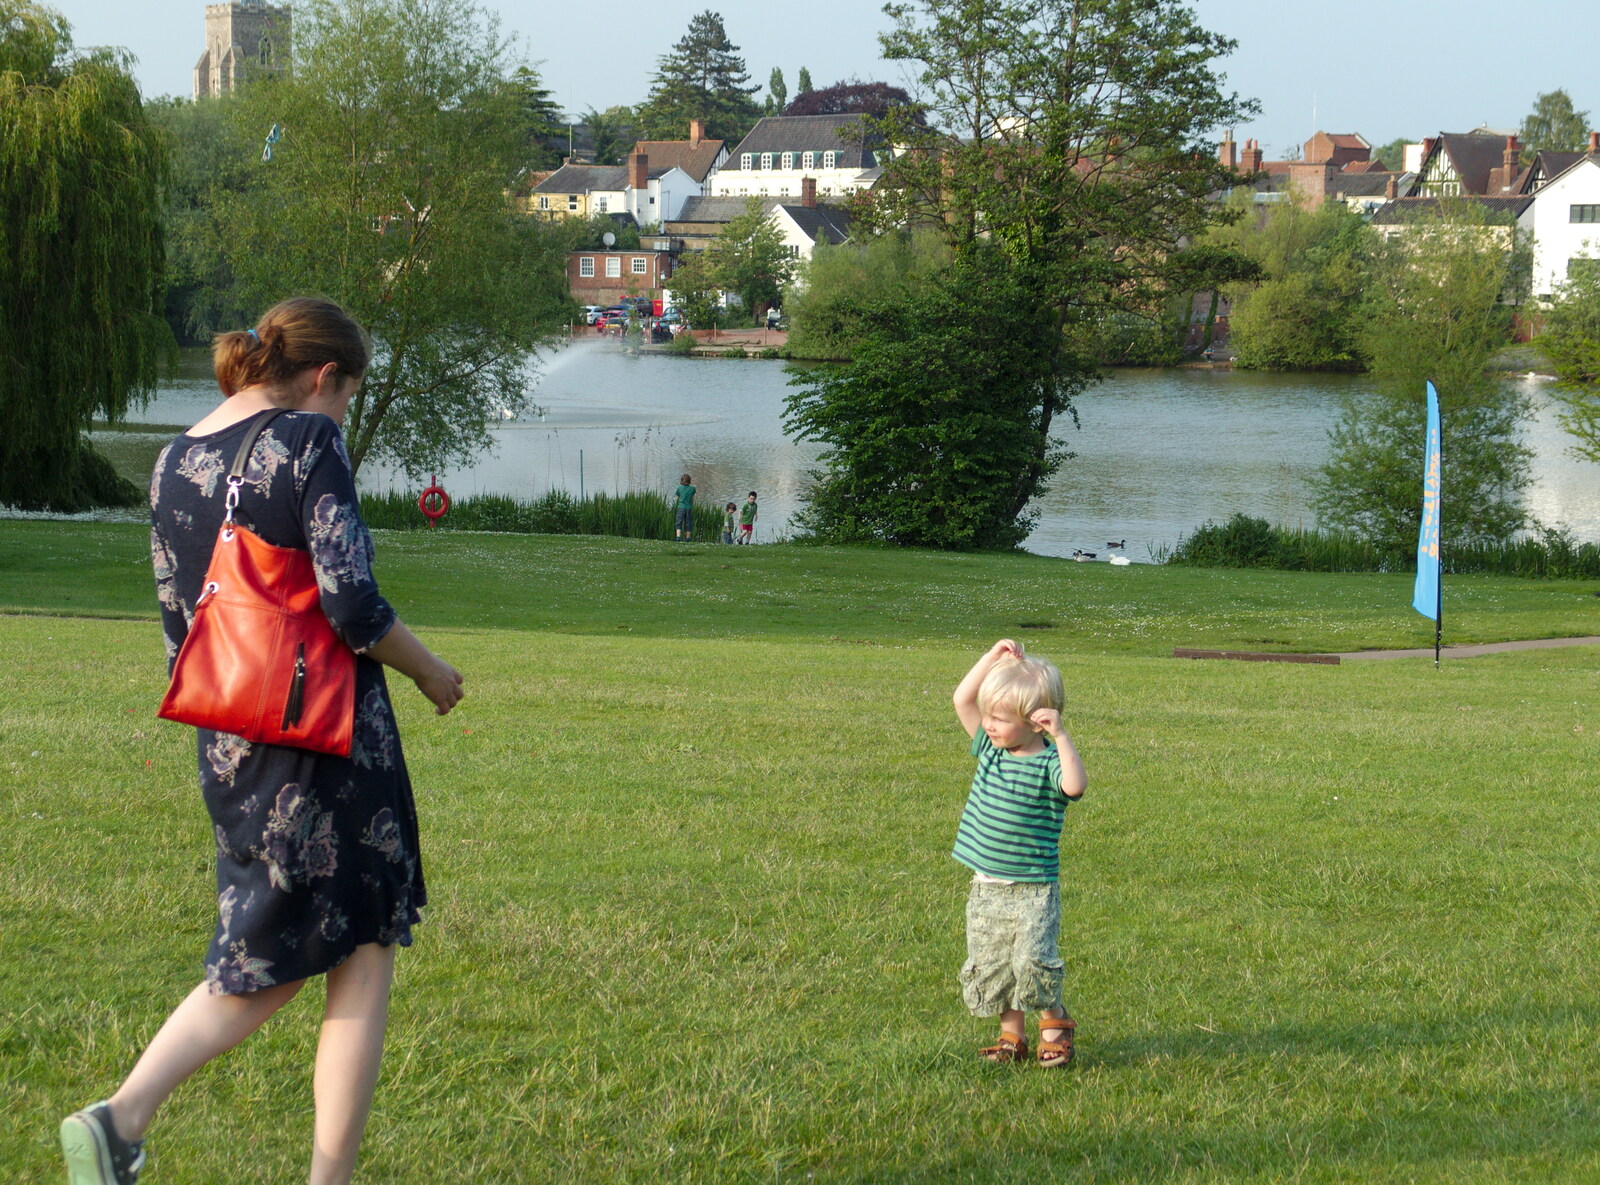 Isobel and Harry near the Mere from A Family Fun Day on the Park, Diss, Norfolk - 16th May 2014